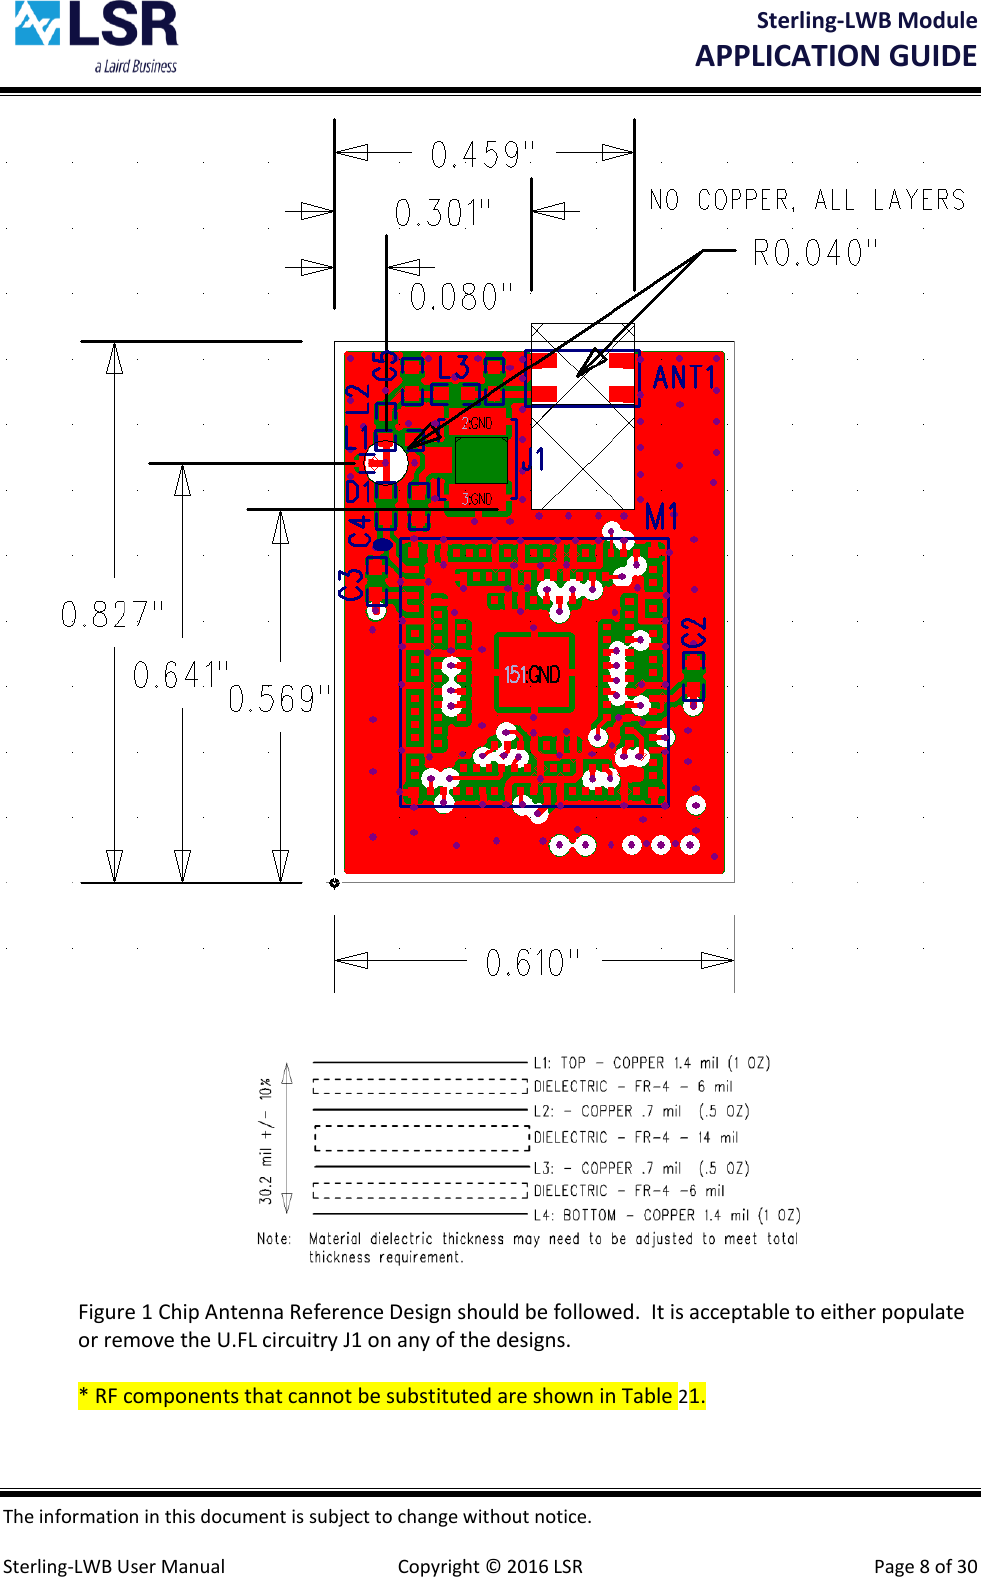 Sterling-LWB Module       APPLICATION GUIDE  The information in this document is subject to change without notice.  Sterling-LWB User Manual  Copyright © 2016 LSR  Page 8 of 30   Figure 1 Chip Antenna Reference Design should be followed.  It is acceptable to either populate or remove the U.FL circuitry J1 on any of the designs.  * RF components that cannot be substituted are shown in Table 21.   